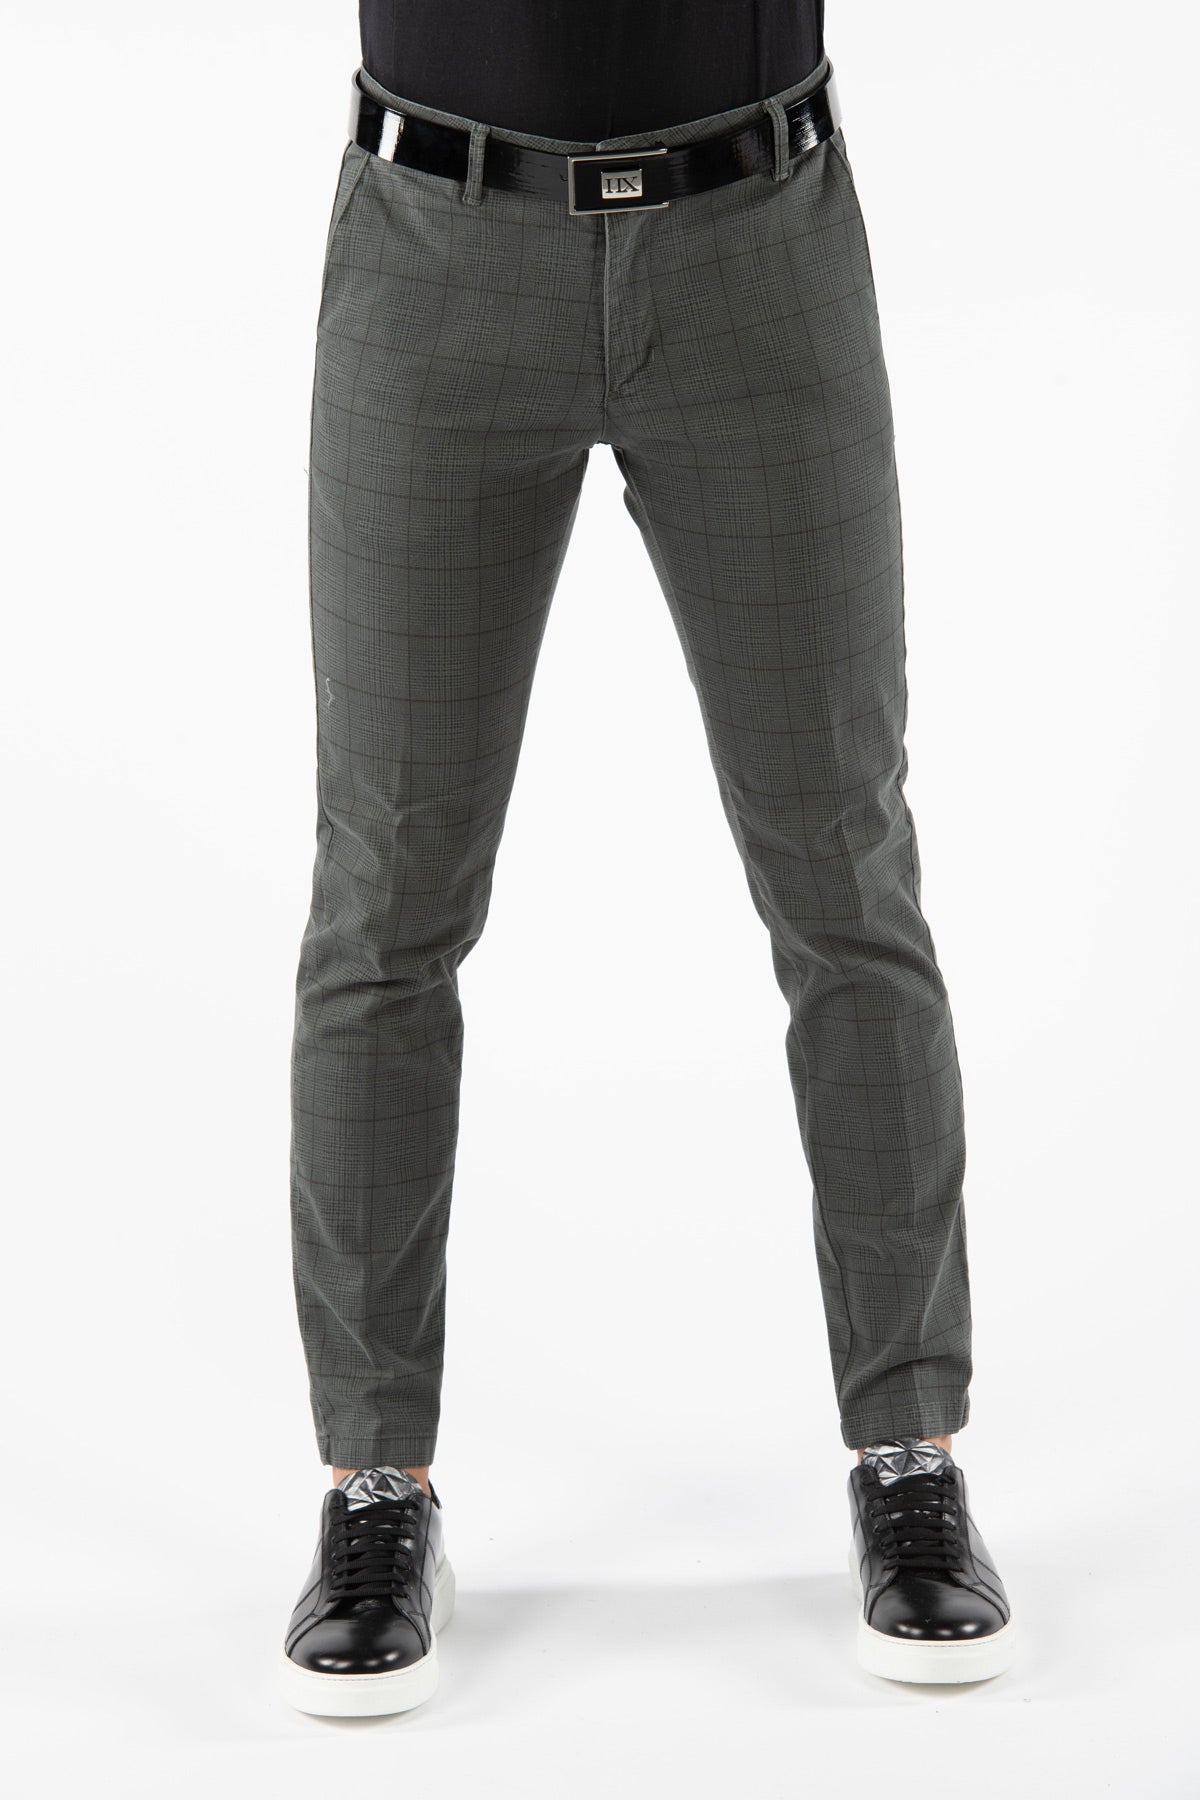 Finsbury winter stretch trousers